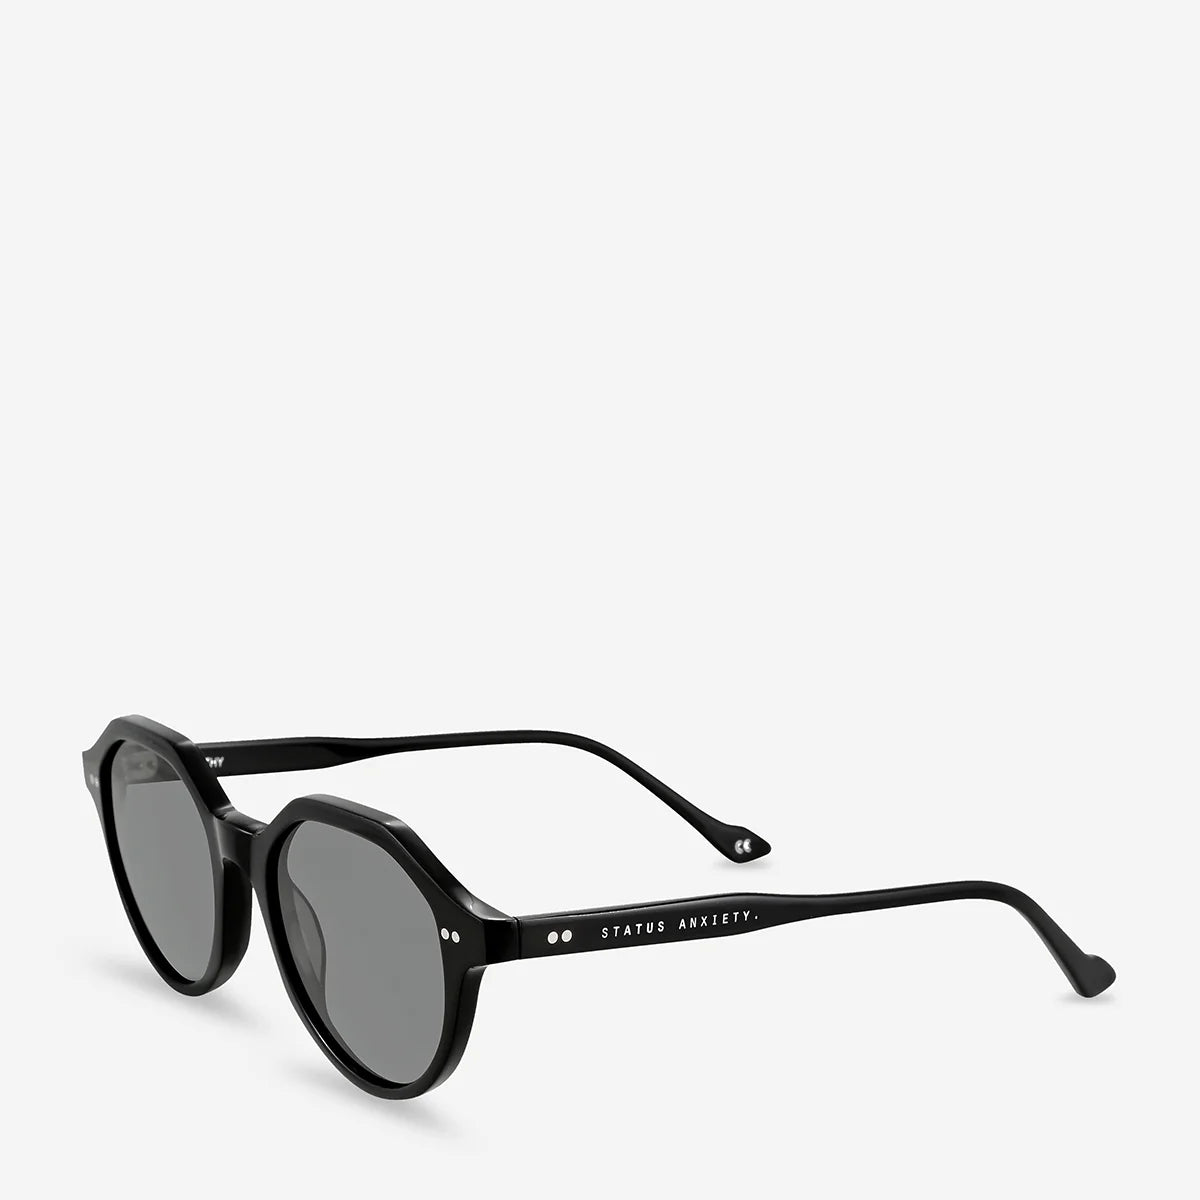 status-anxiety-sunglasses-apathy-black-side-front.webp